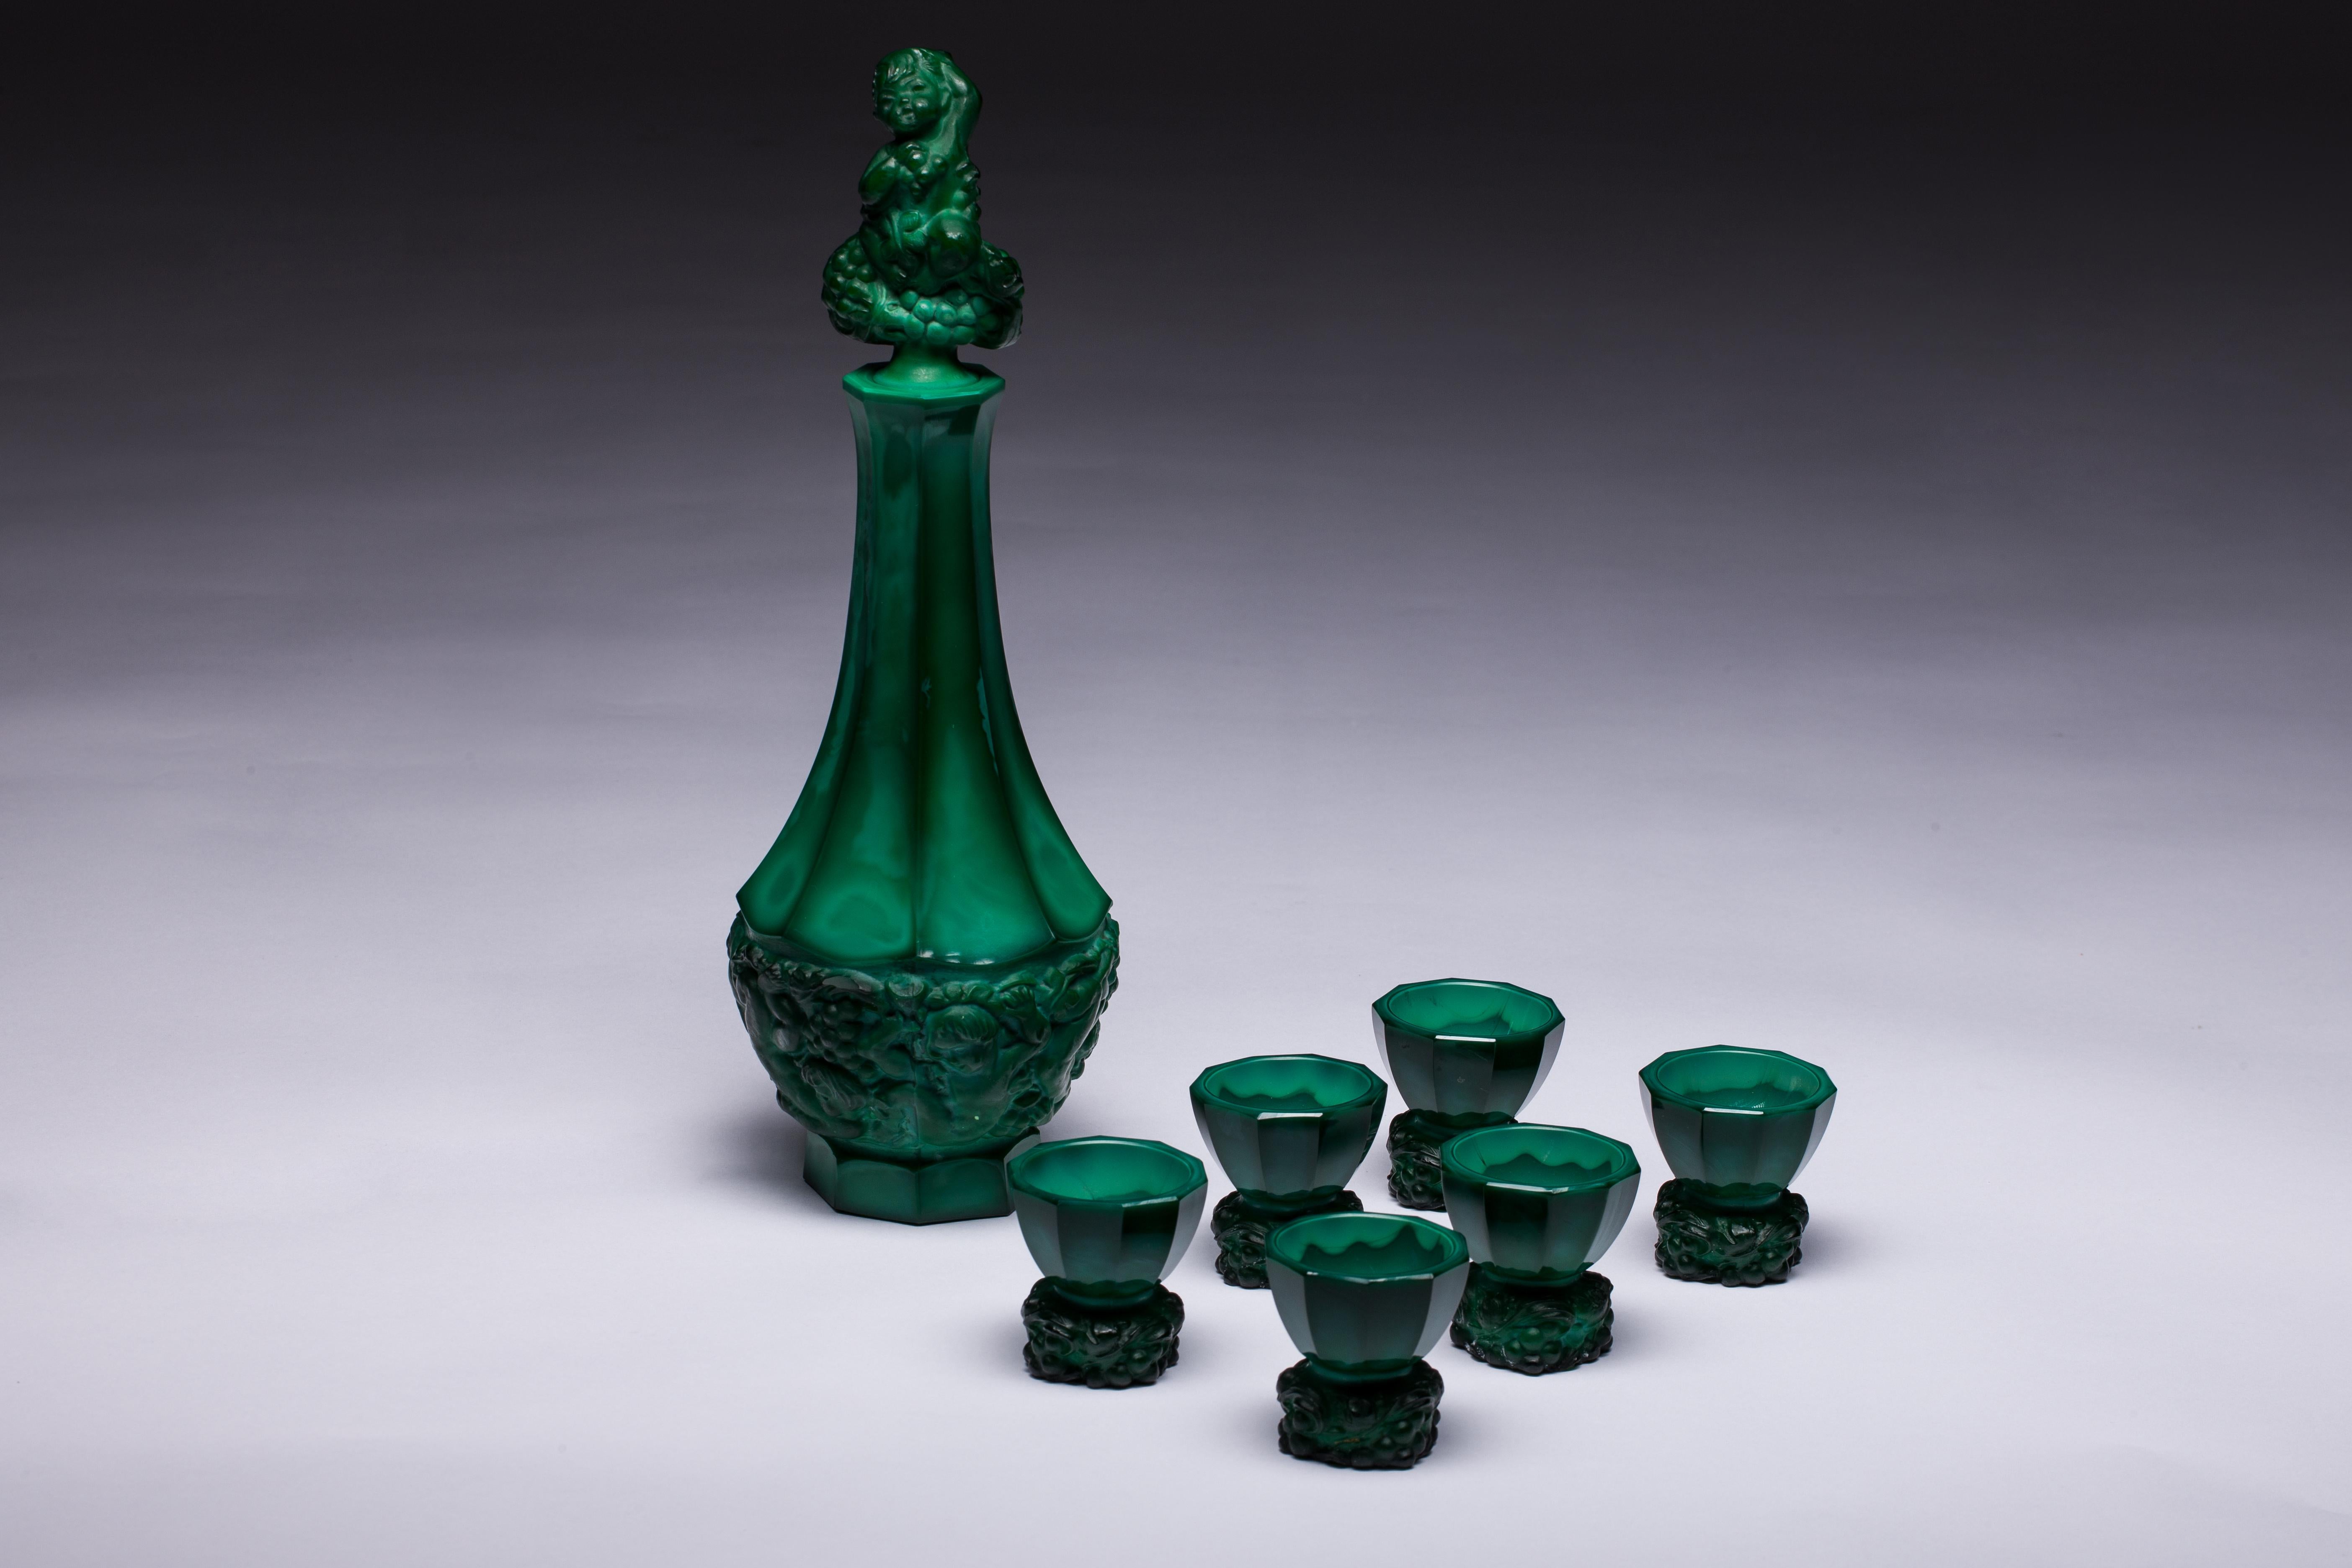 Czech malachite glass decanter with elaborate, decorative stopper and five matching glasses, circa 1930s. Sold and priced as a set. Decanter H 33.5 cm x D 12 cm. Glasses H 5.5 cm x D 5.5 cm.